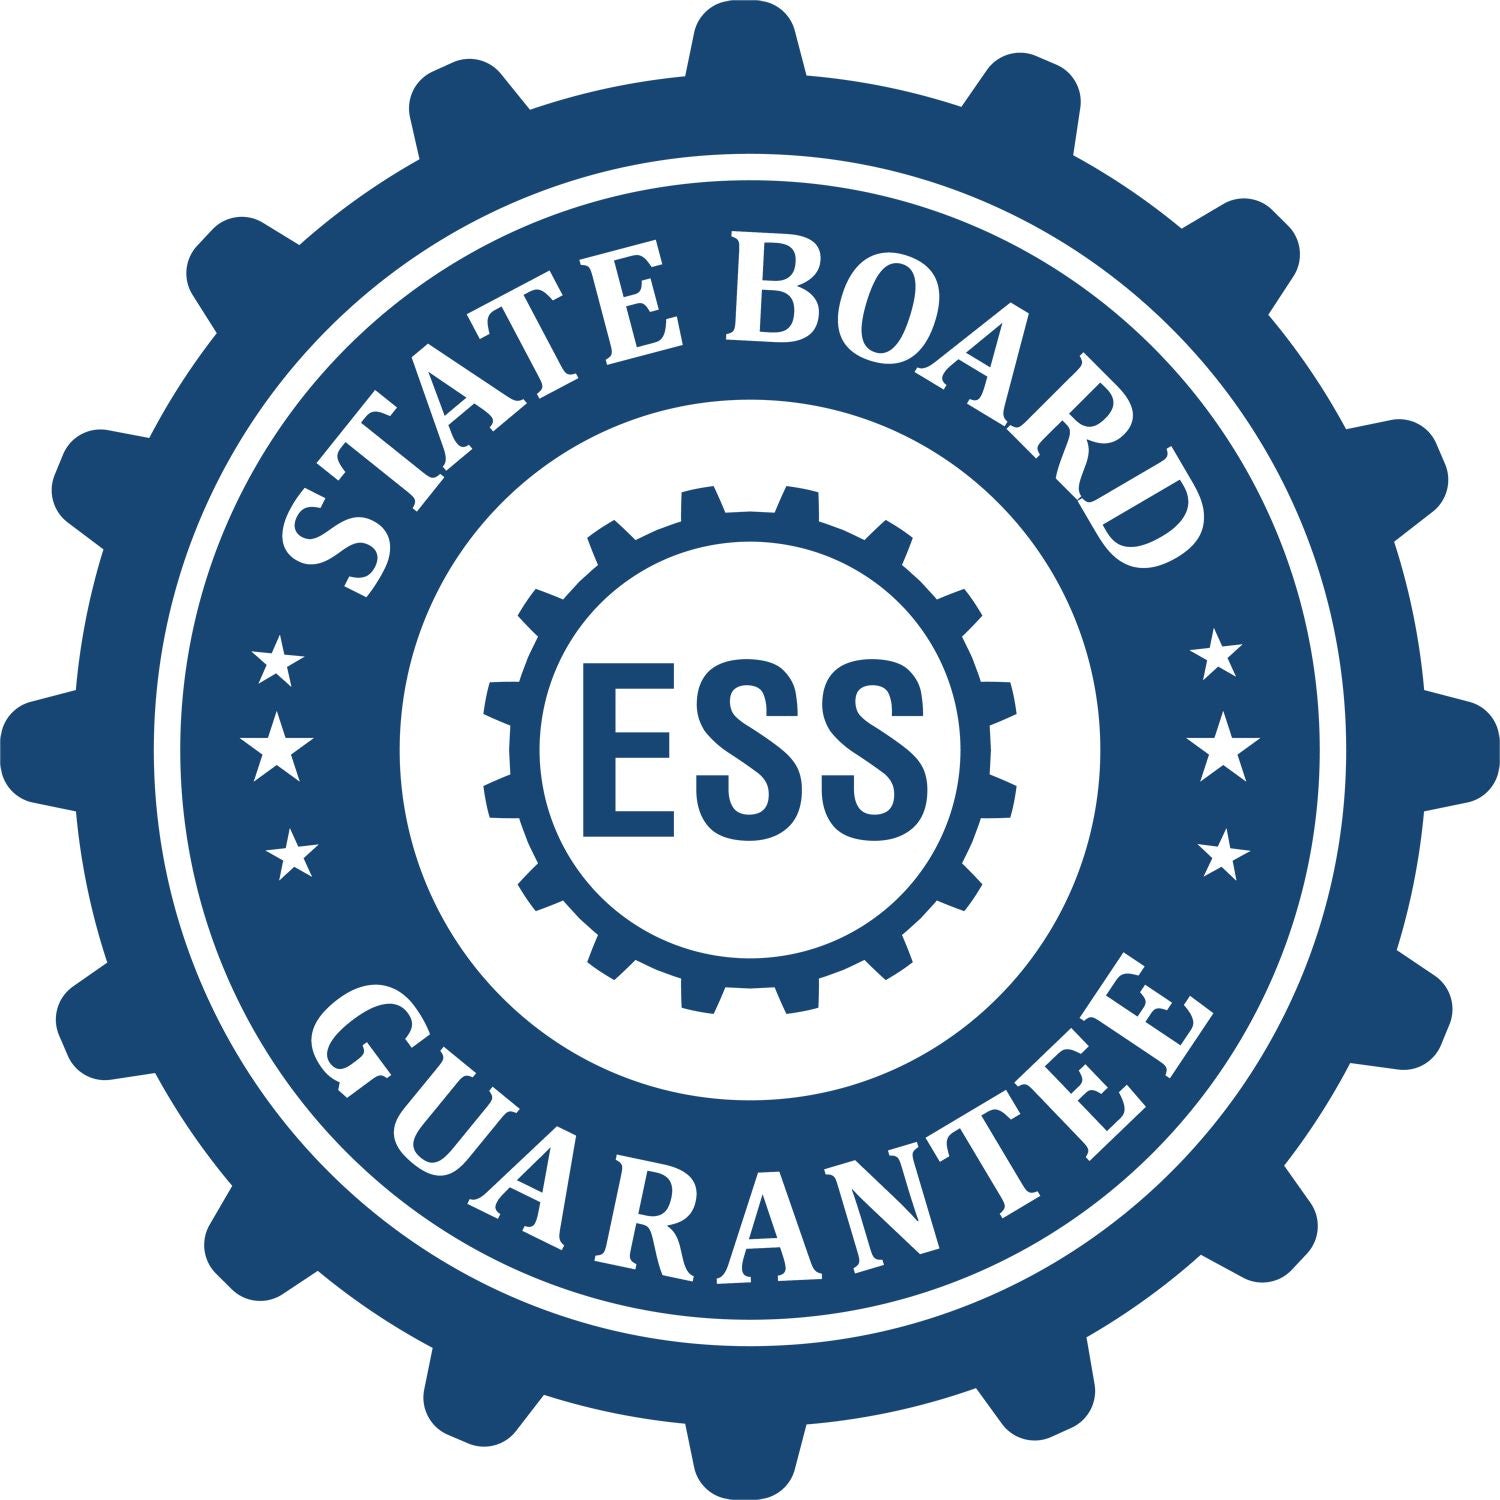 An emblem in a gear shape illustrating a state board guarantee for the Kentucky Desk Landscape Architectural Seal Embosser product.